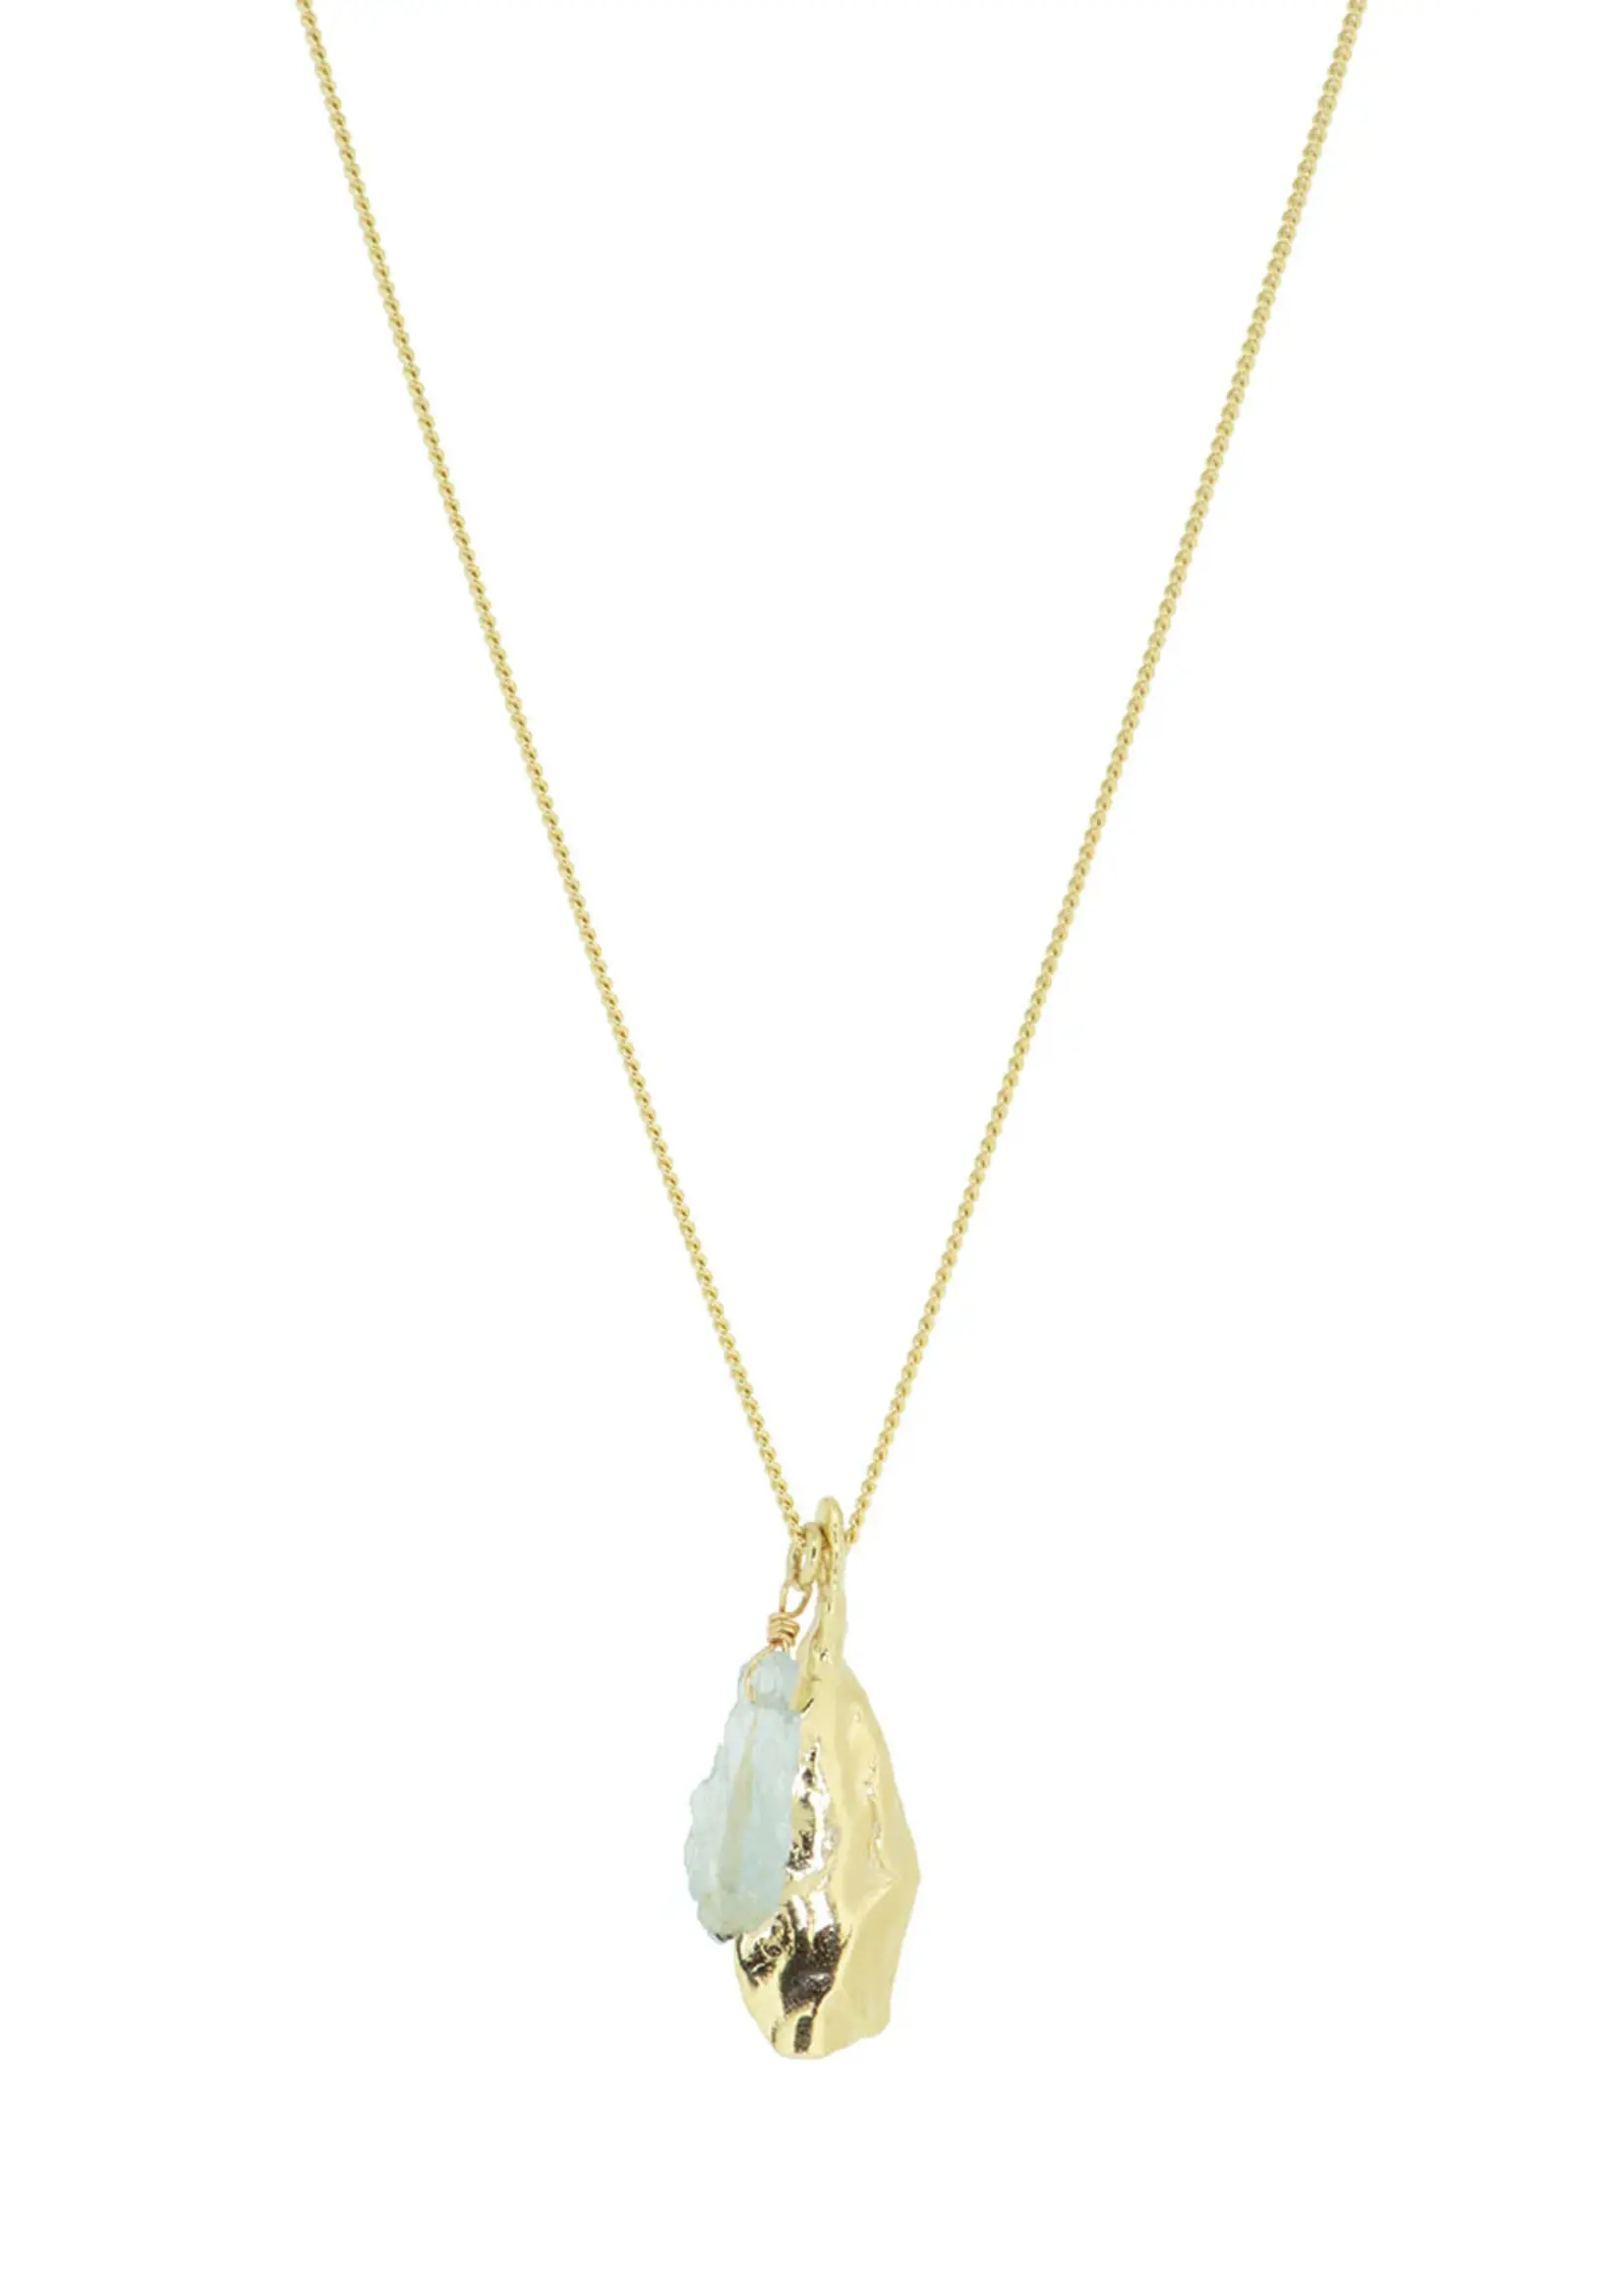 by1oak Together necklace - gold